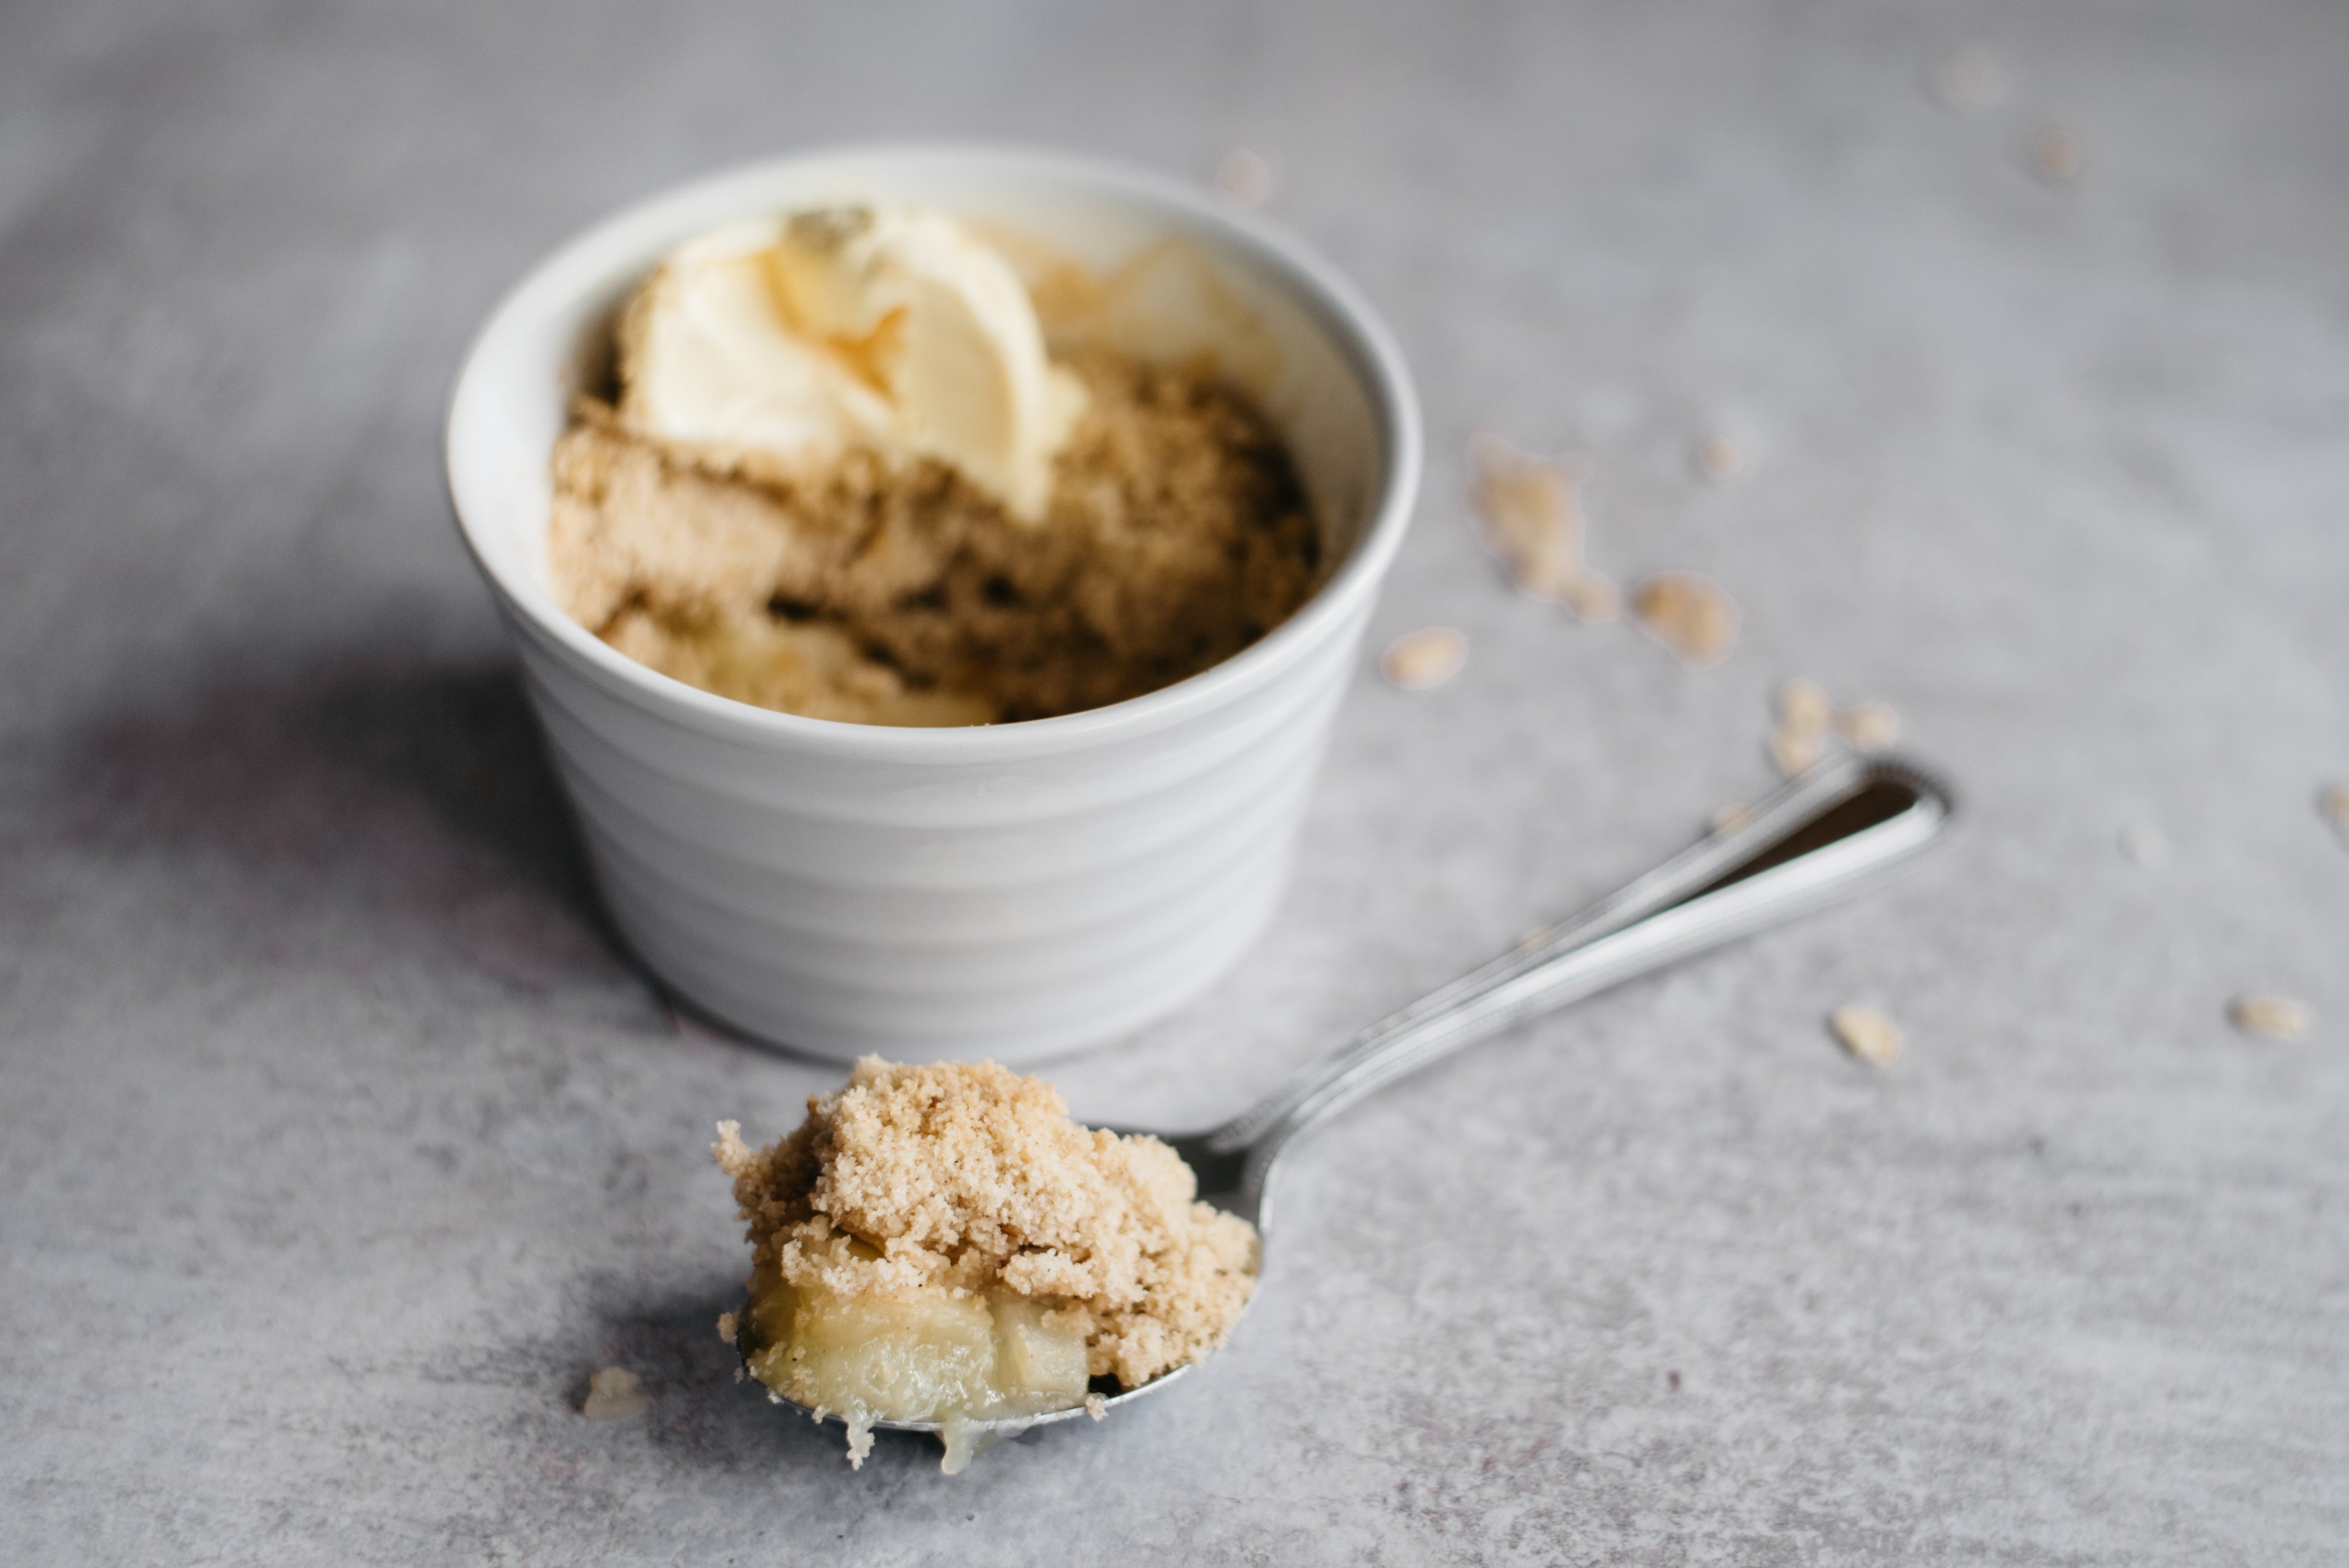 Close up of Mini Apple & Cinnamon Crumble with a spoon dipped into is showing the apple filling, and crunchy crumble topping